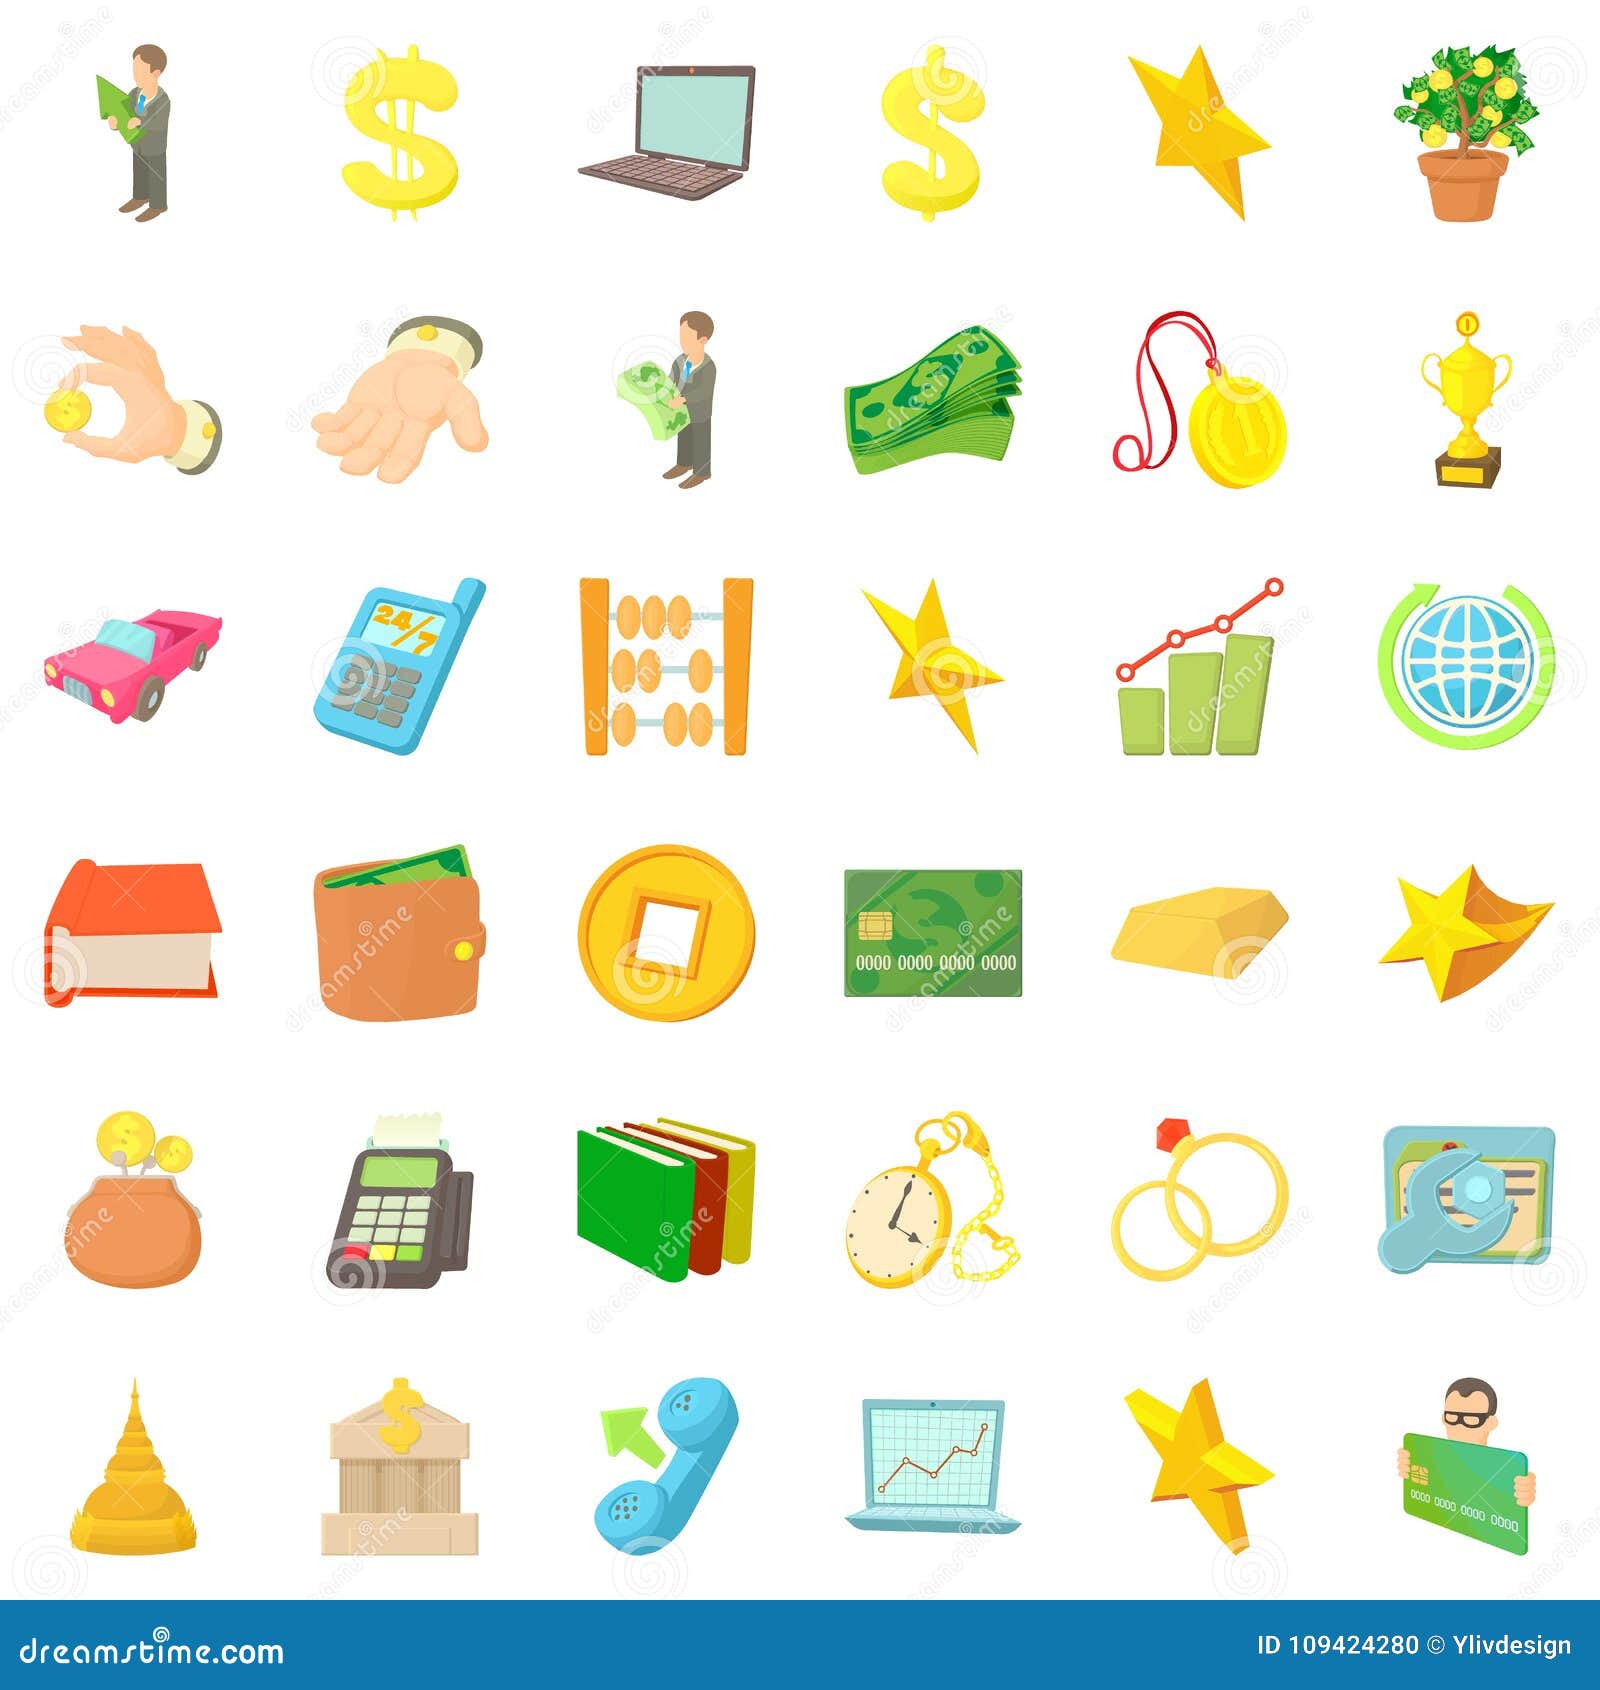 filthy lucre icons set, cartoon style